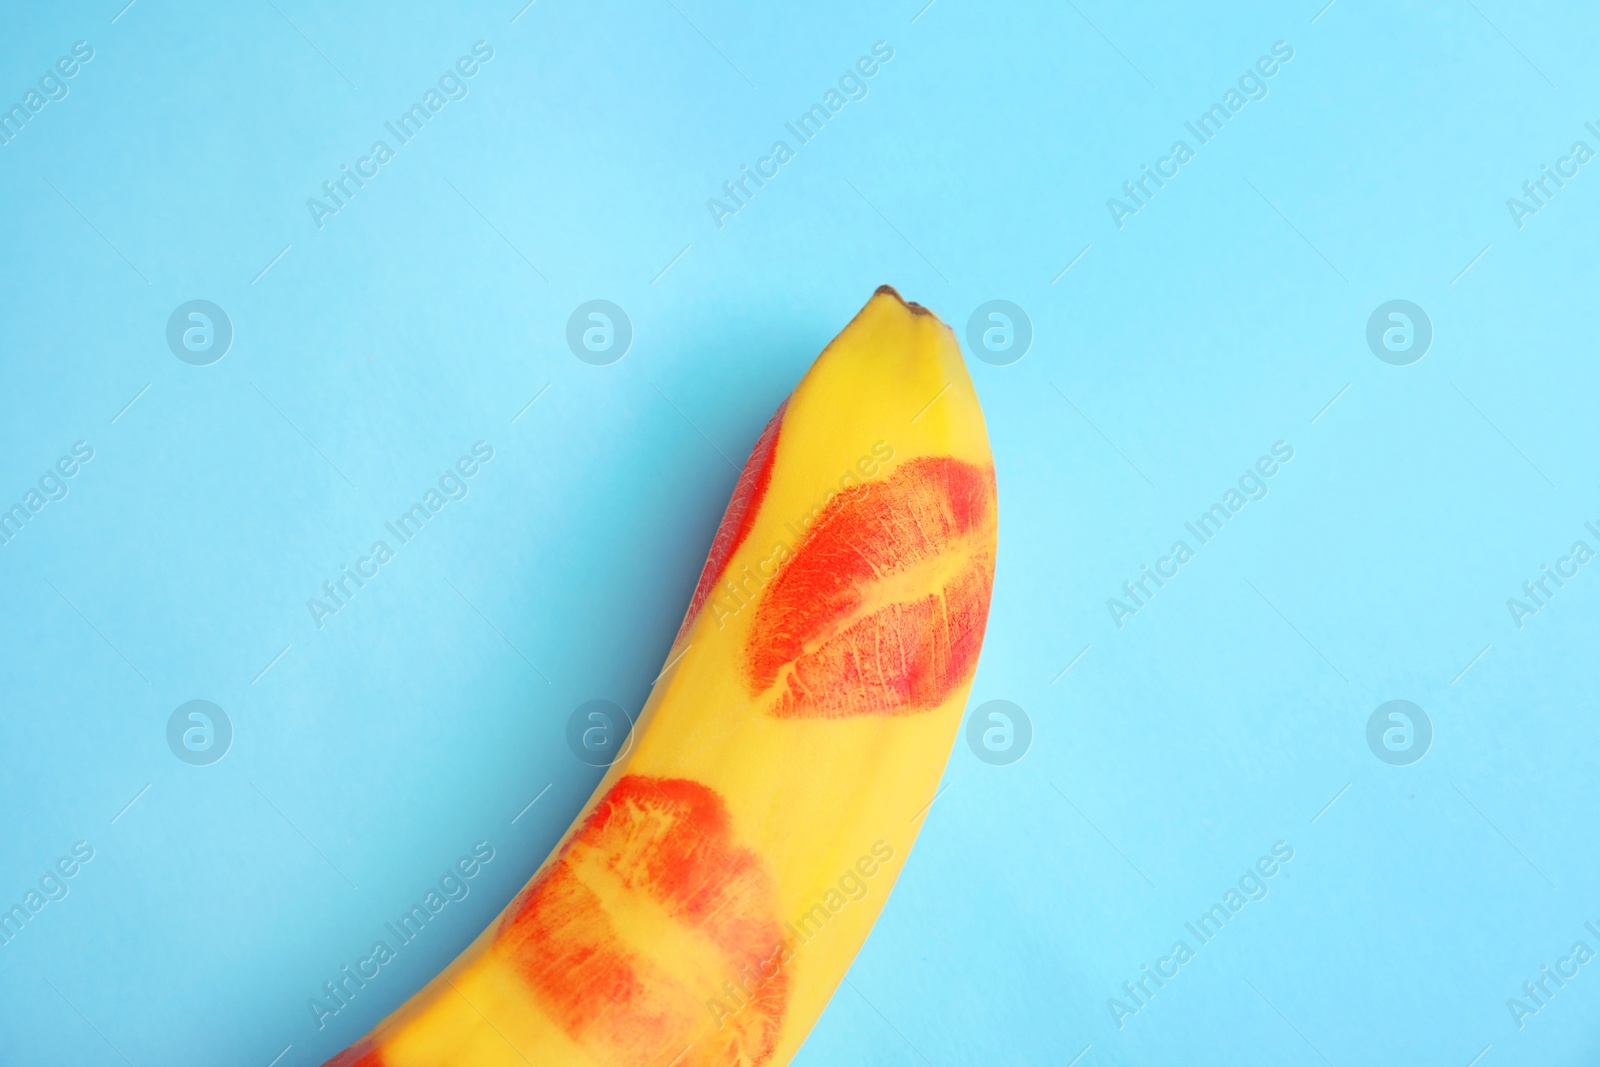 Photo of Top view of fresh banana with red lipstick marks on blue background. Oral sex concept